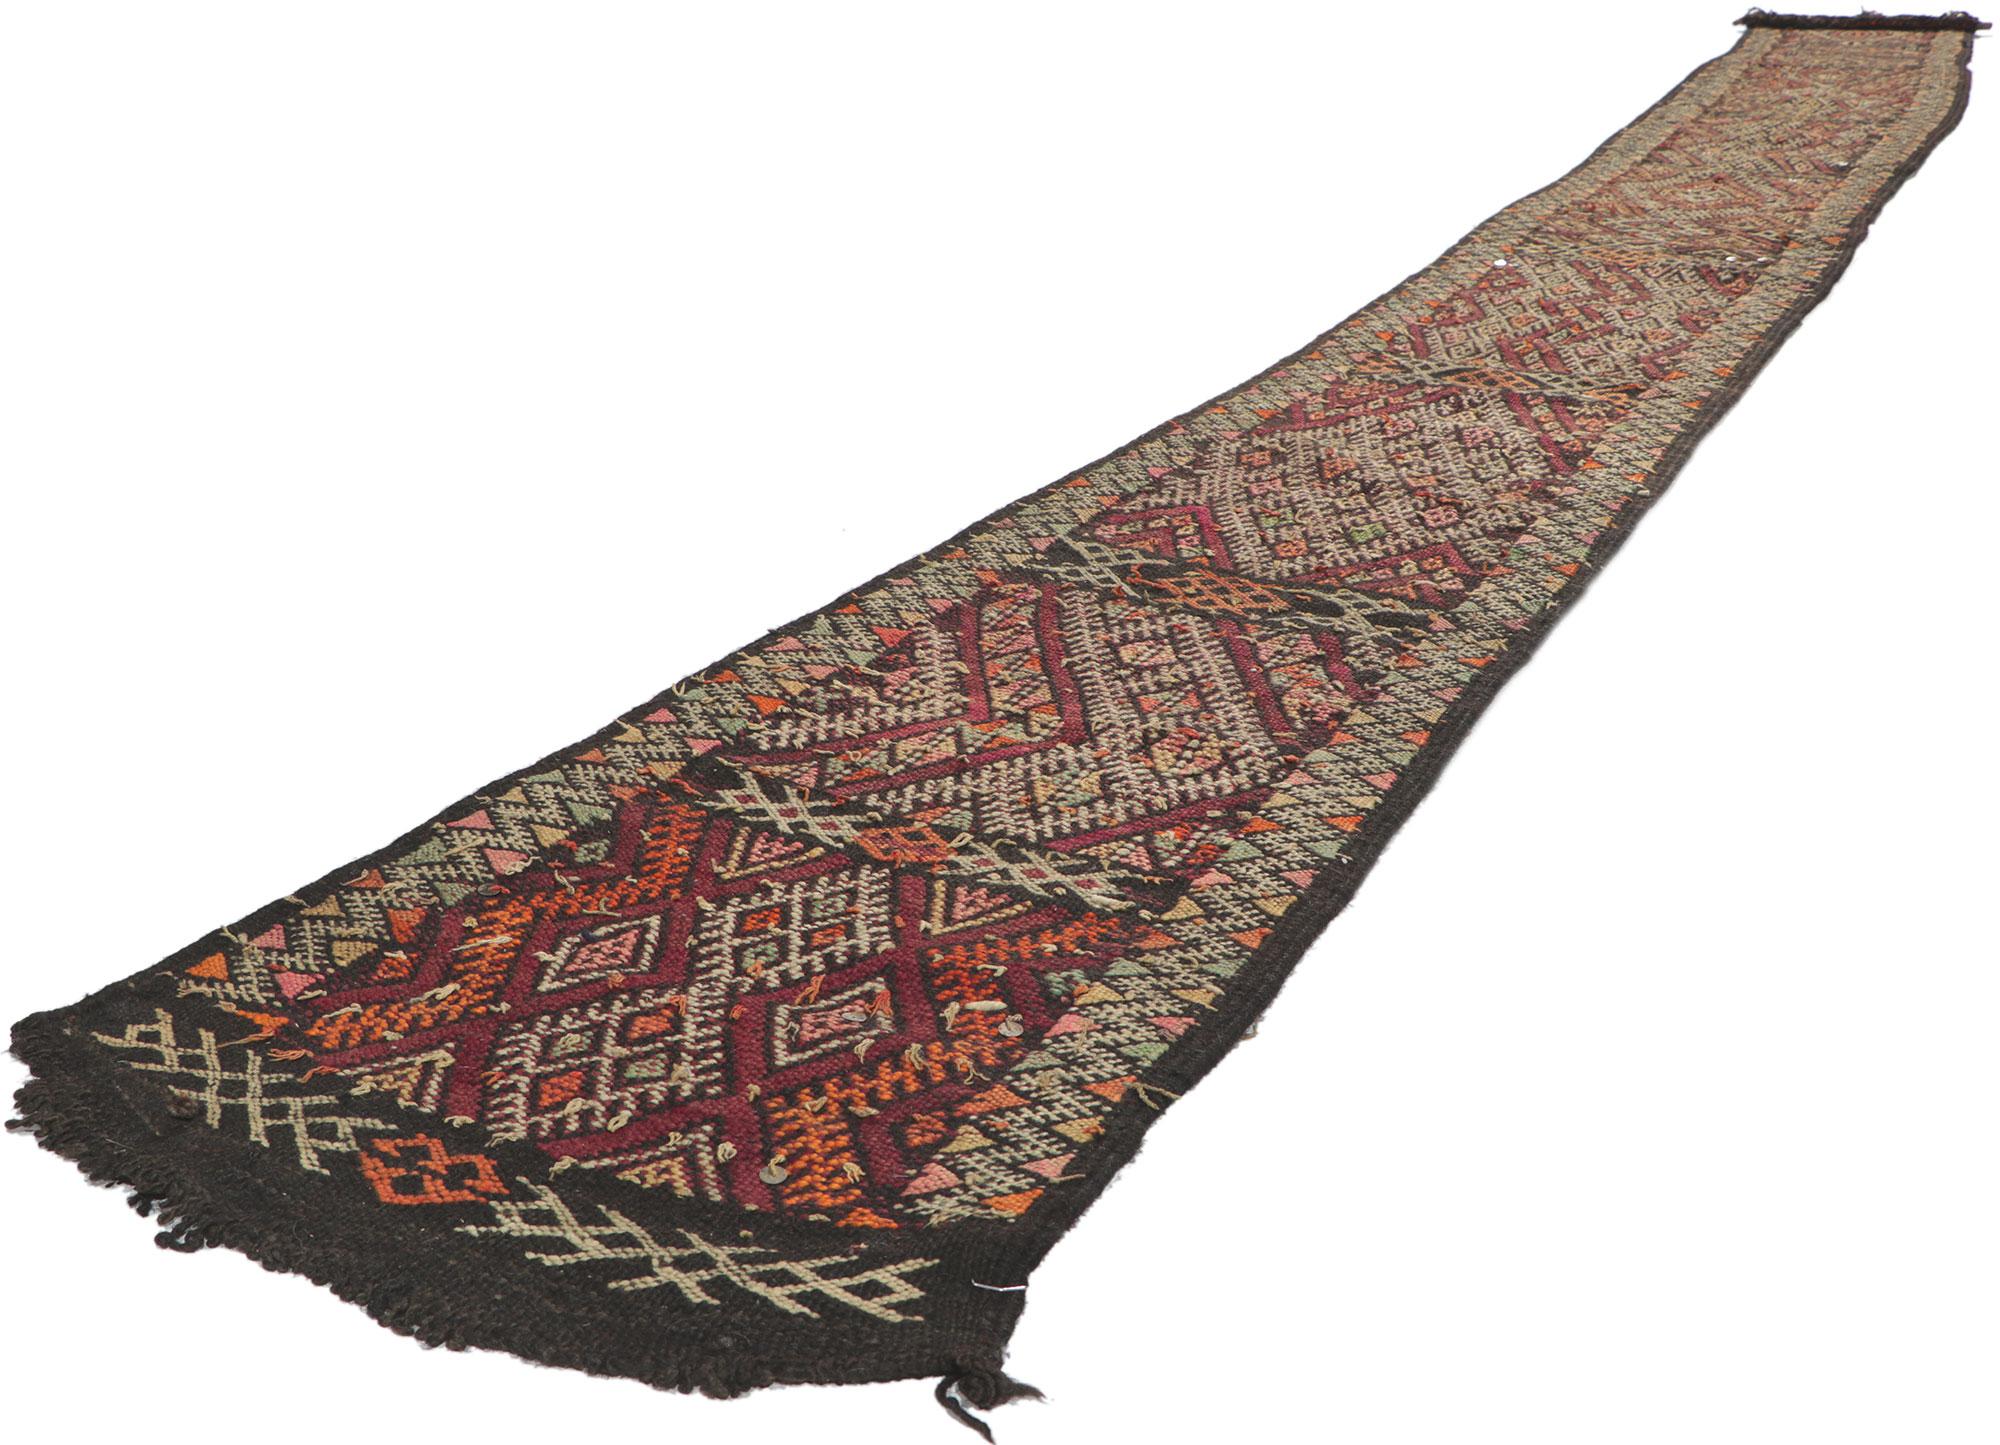 21715 Vintage Zemmour Moroccan Kilim runner, 01'07 x 16'00. Full of tiny details and tribal style, this hand-woven wool vintage Zemmour Berber Moroccan kilim rug runner is a captivating vision of woven beauty. The abrashed field is composed of